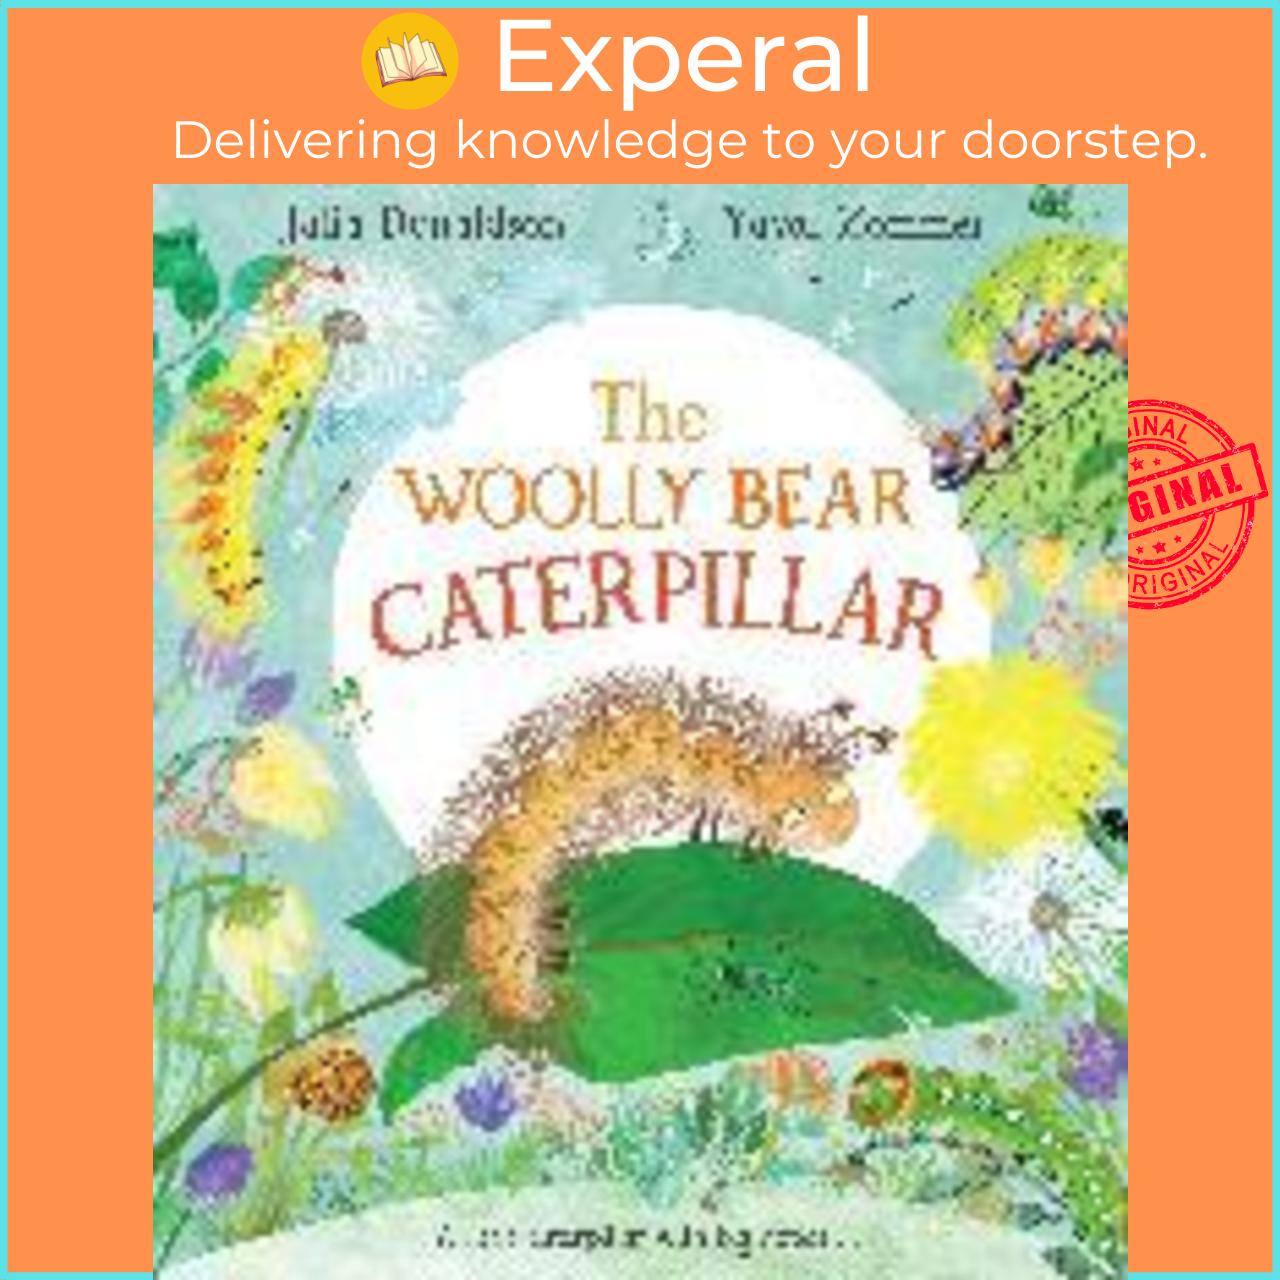 Sách - The Woolly Bear Caterpillar by Julia Donaldson Yuval Zommer (UK edition, hardcover)